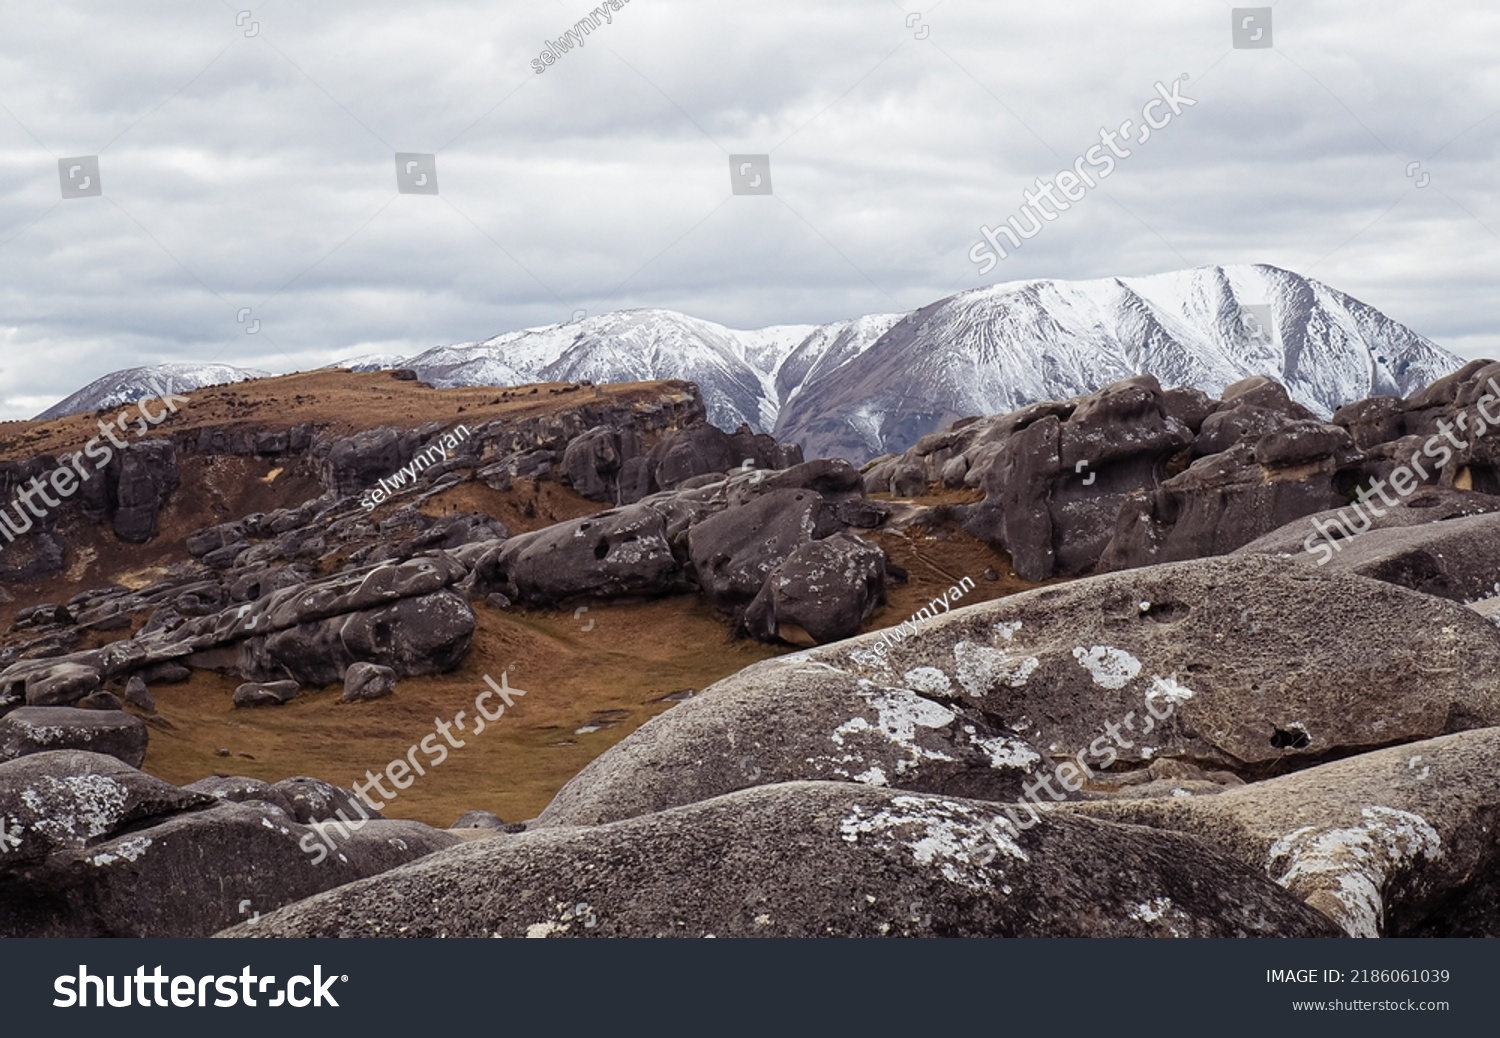 Castle Hill, Canterbury, New Zealand.

View of a beautiful rocky terrain on a cloudy day with snow topped mountains in the background. #2186061039